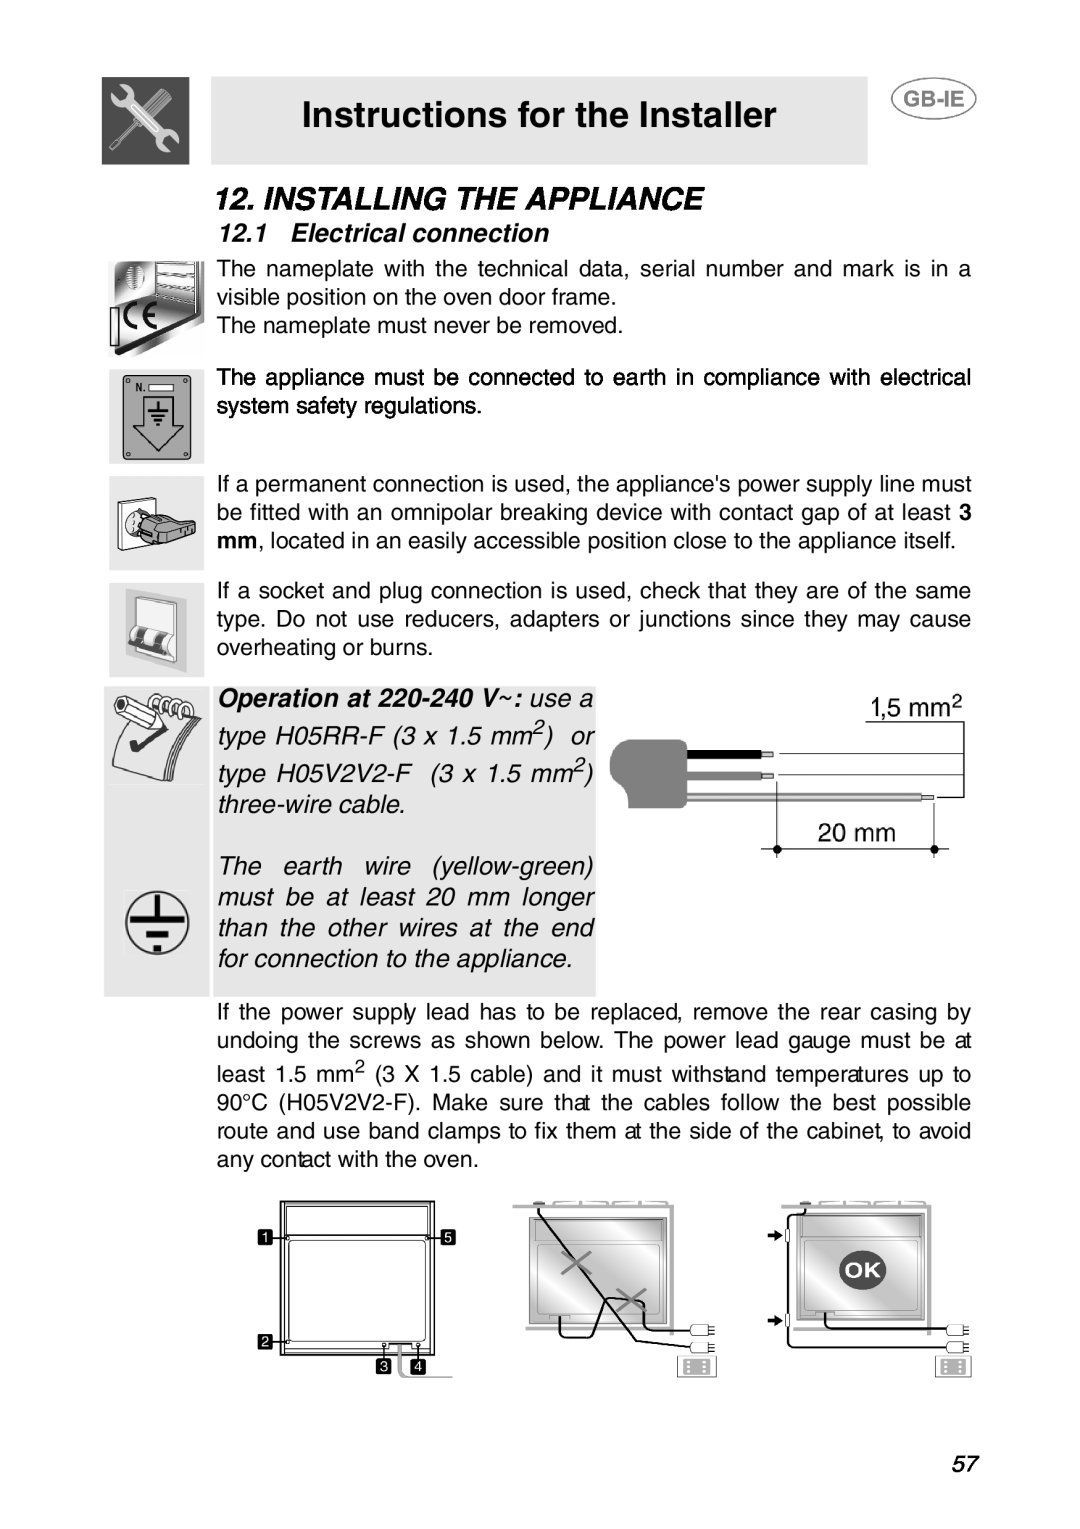 Smeg SCP108SG Instructions for the Installer, Installing The Appliance, Electrical connection, type H05RR-F 3 x 1.5 mm2 or 